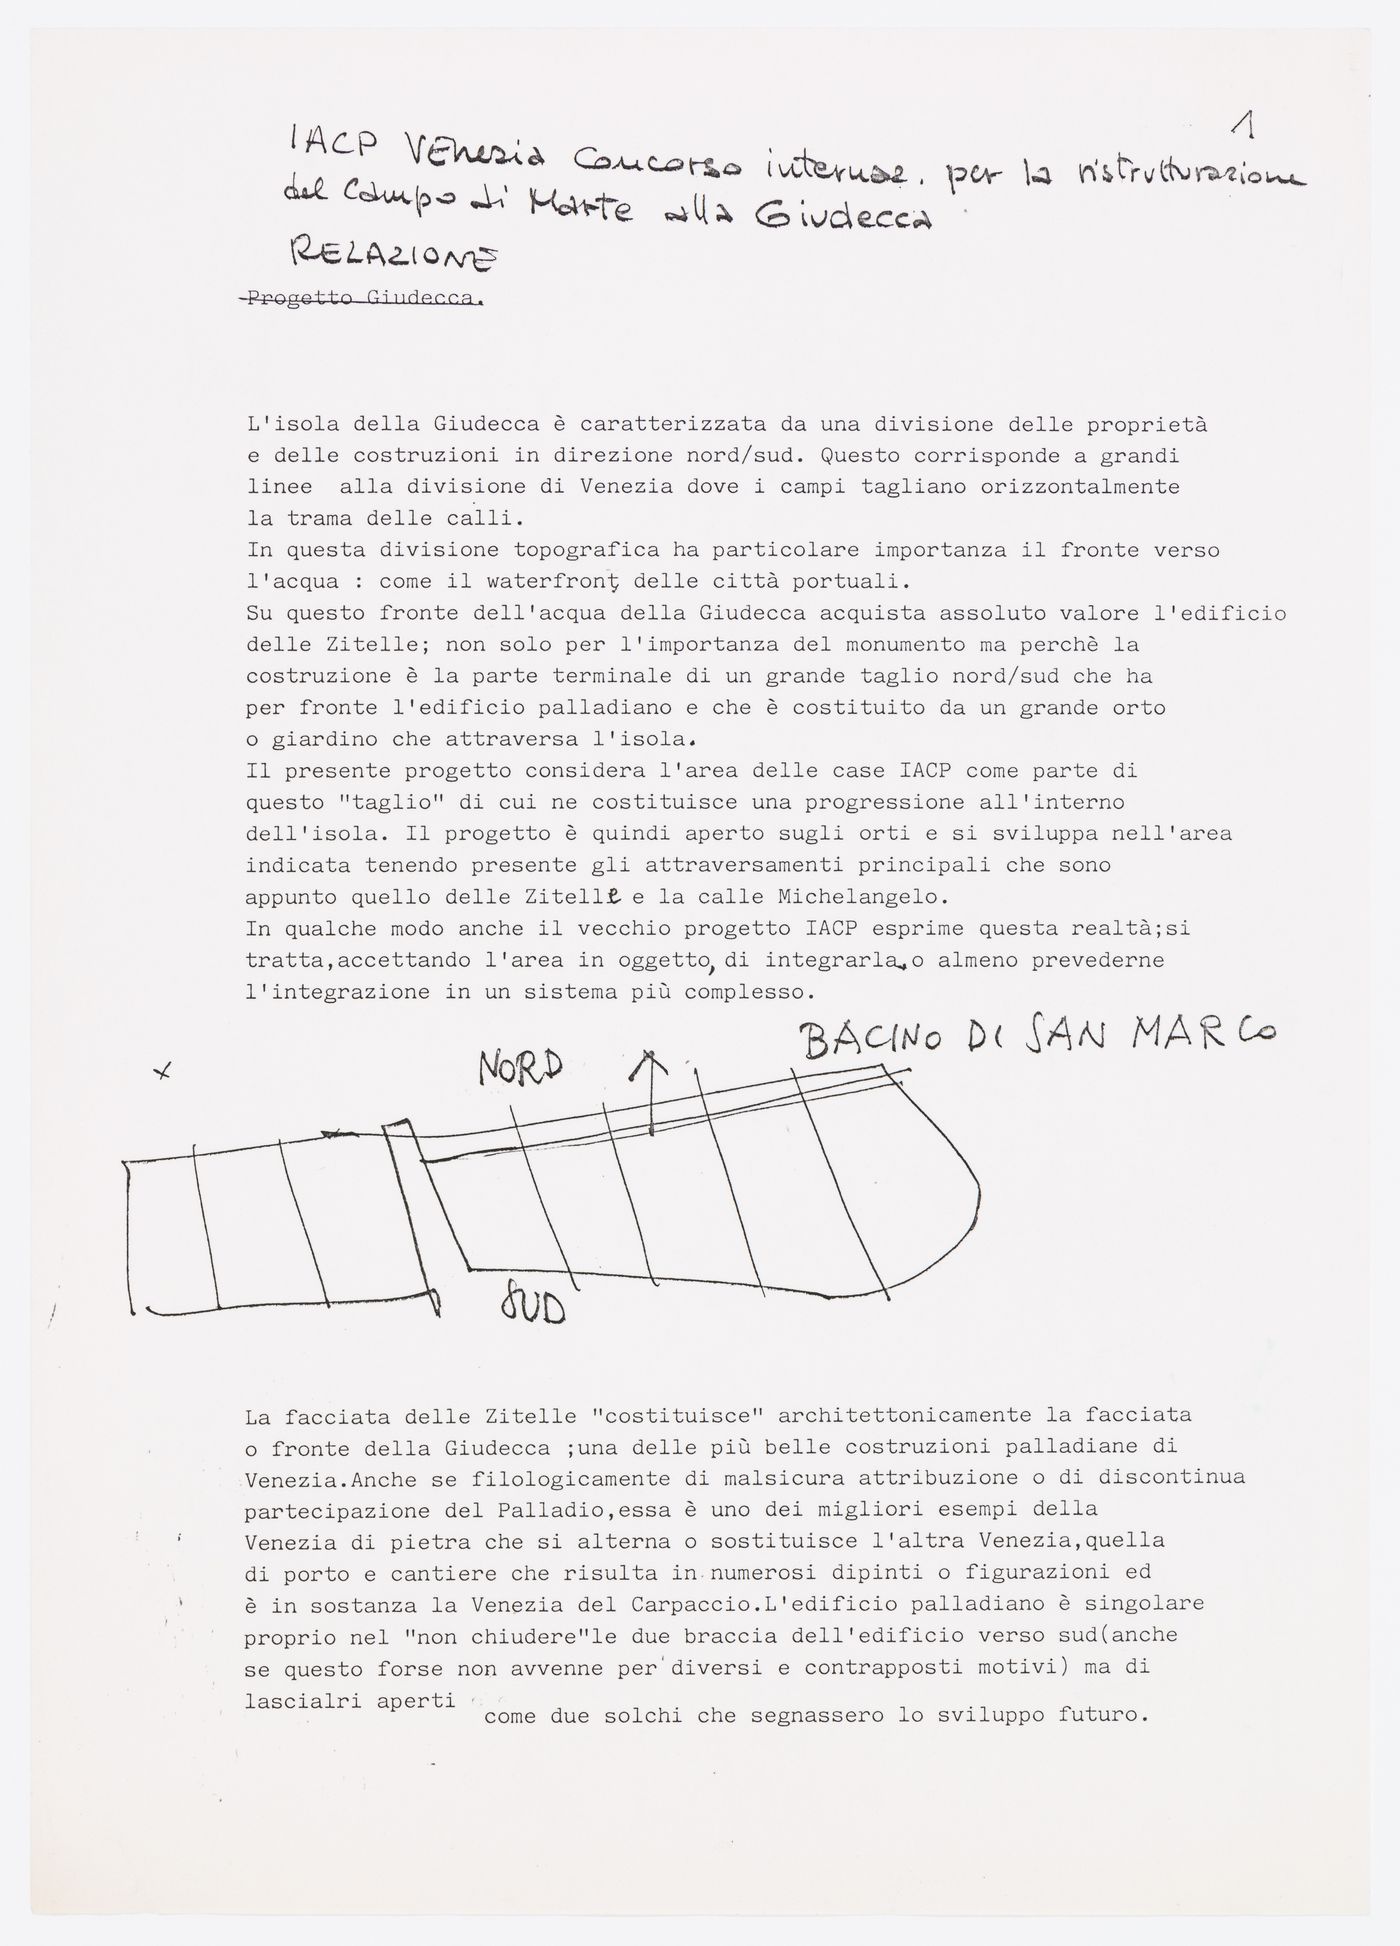 Draft of a text for the report submitted by Aldo Rossi and Gianni Braghieri for the competition for redevelopment of the Campo di Marte area, La Giudecca, Venice, Italy